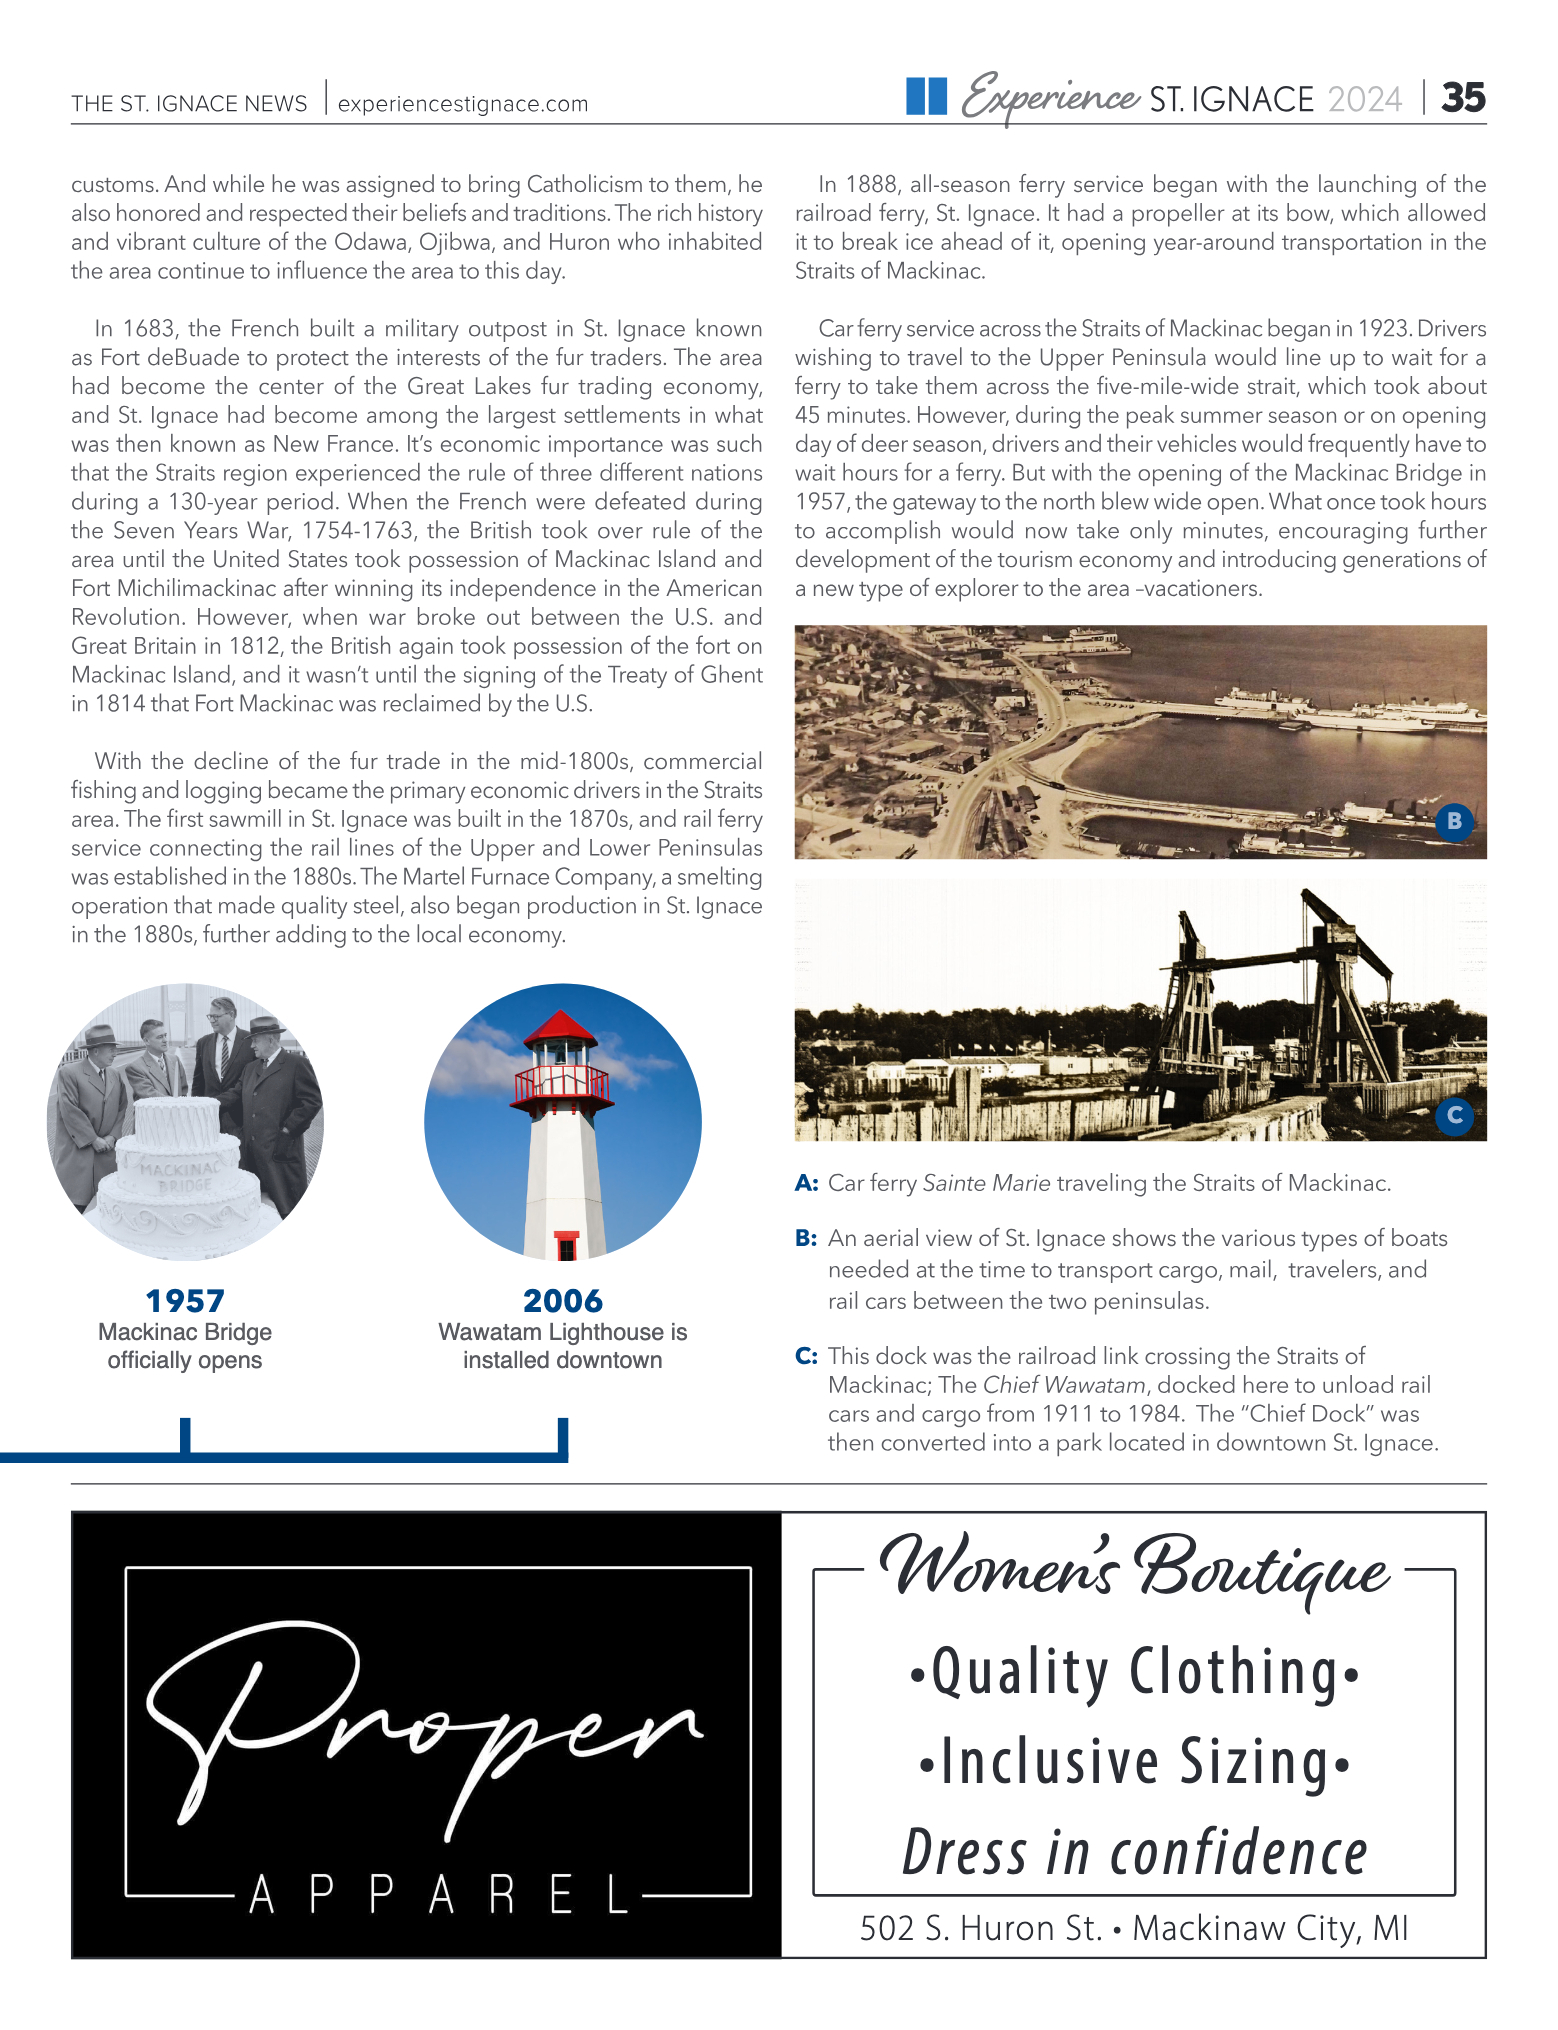 Experience St. Ignace - Guest Travel Guide 2024 - page 35